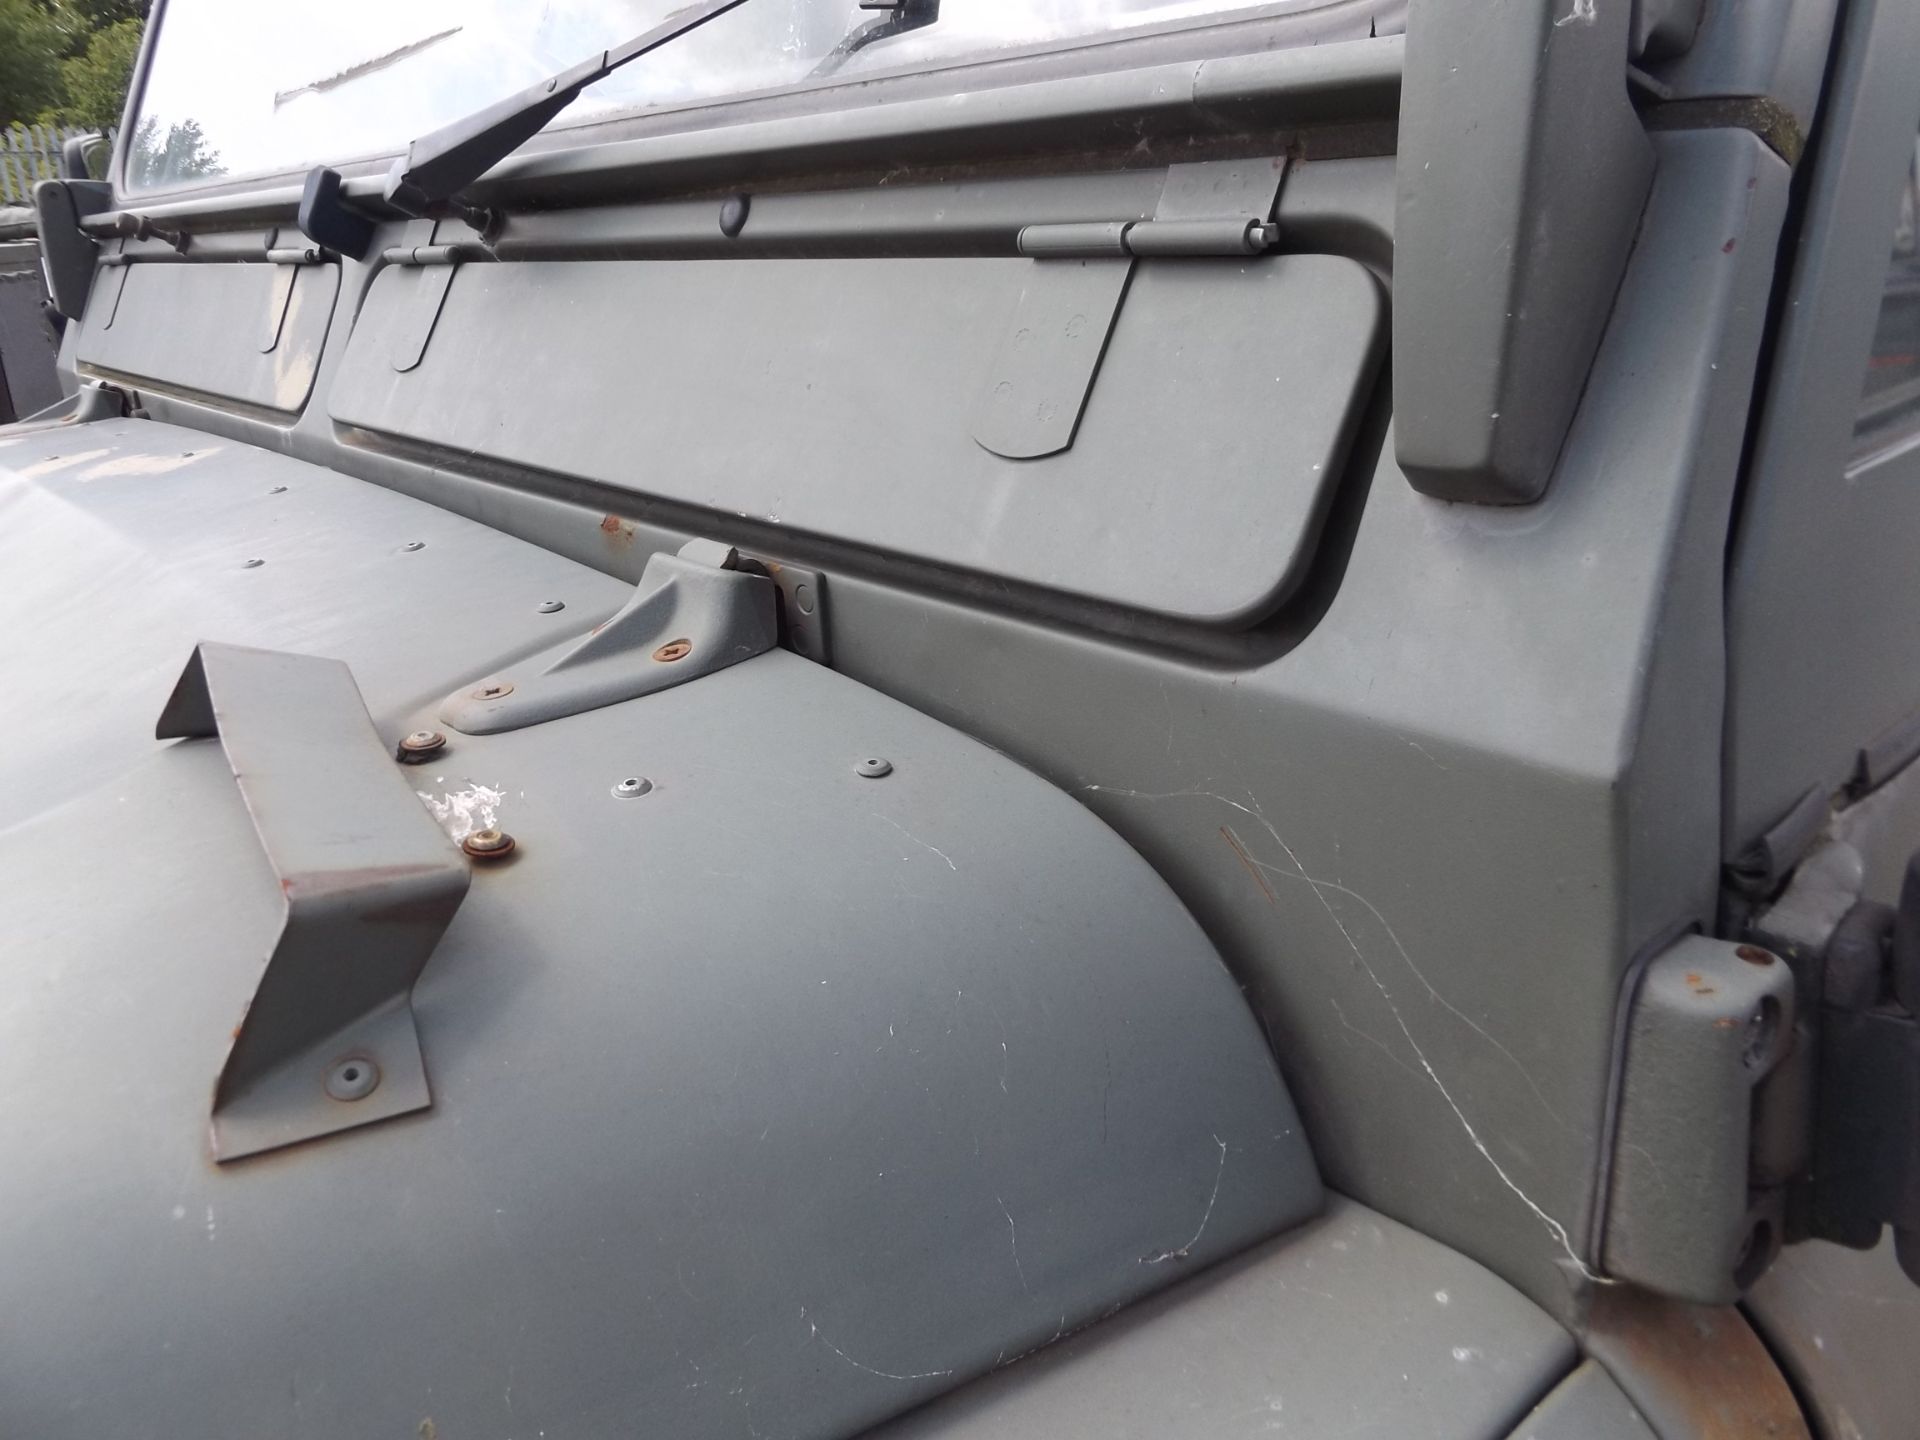 Military Specification Land Rover Wolf 90 Soft Top with Remus upgrade - Image 11 of 19